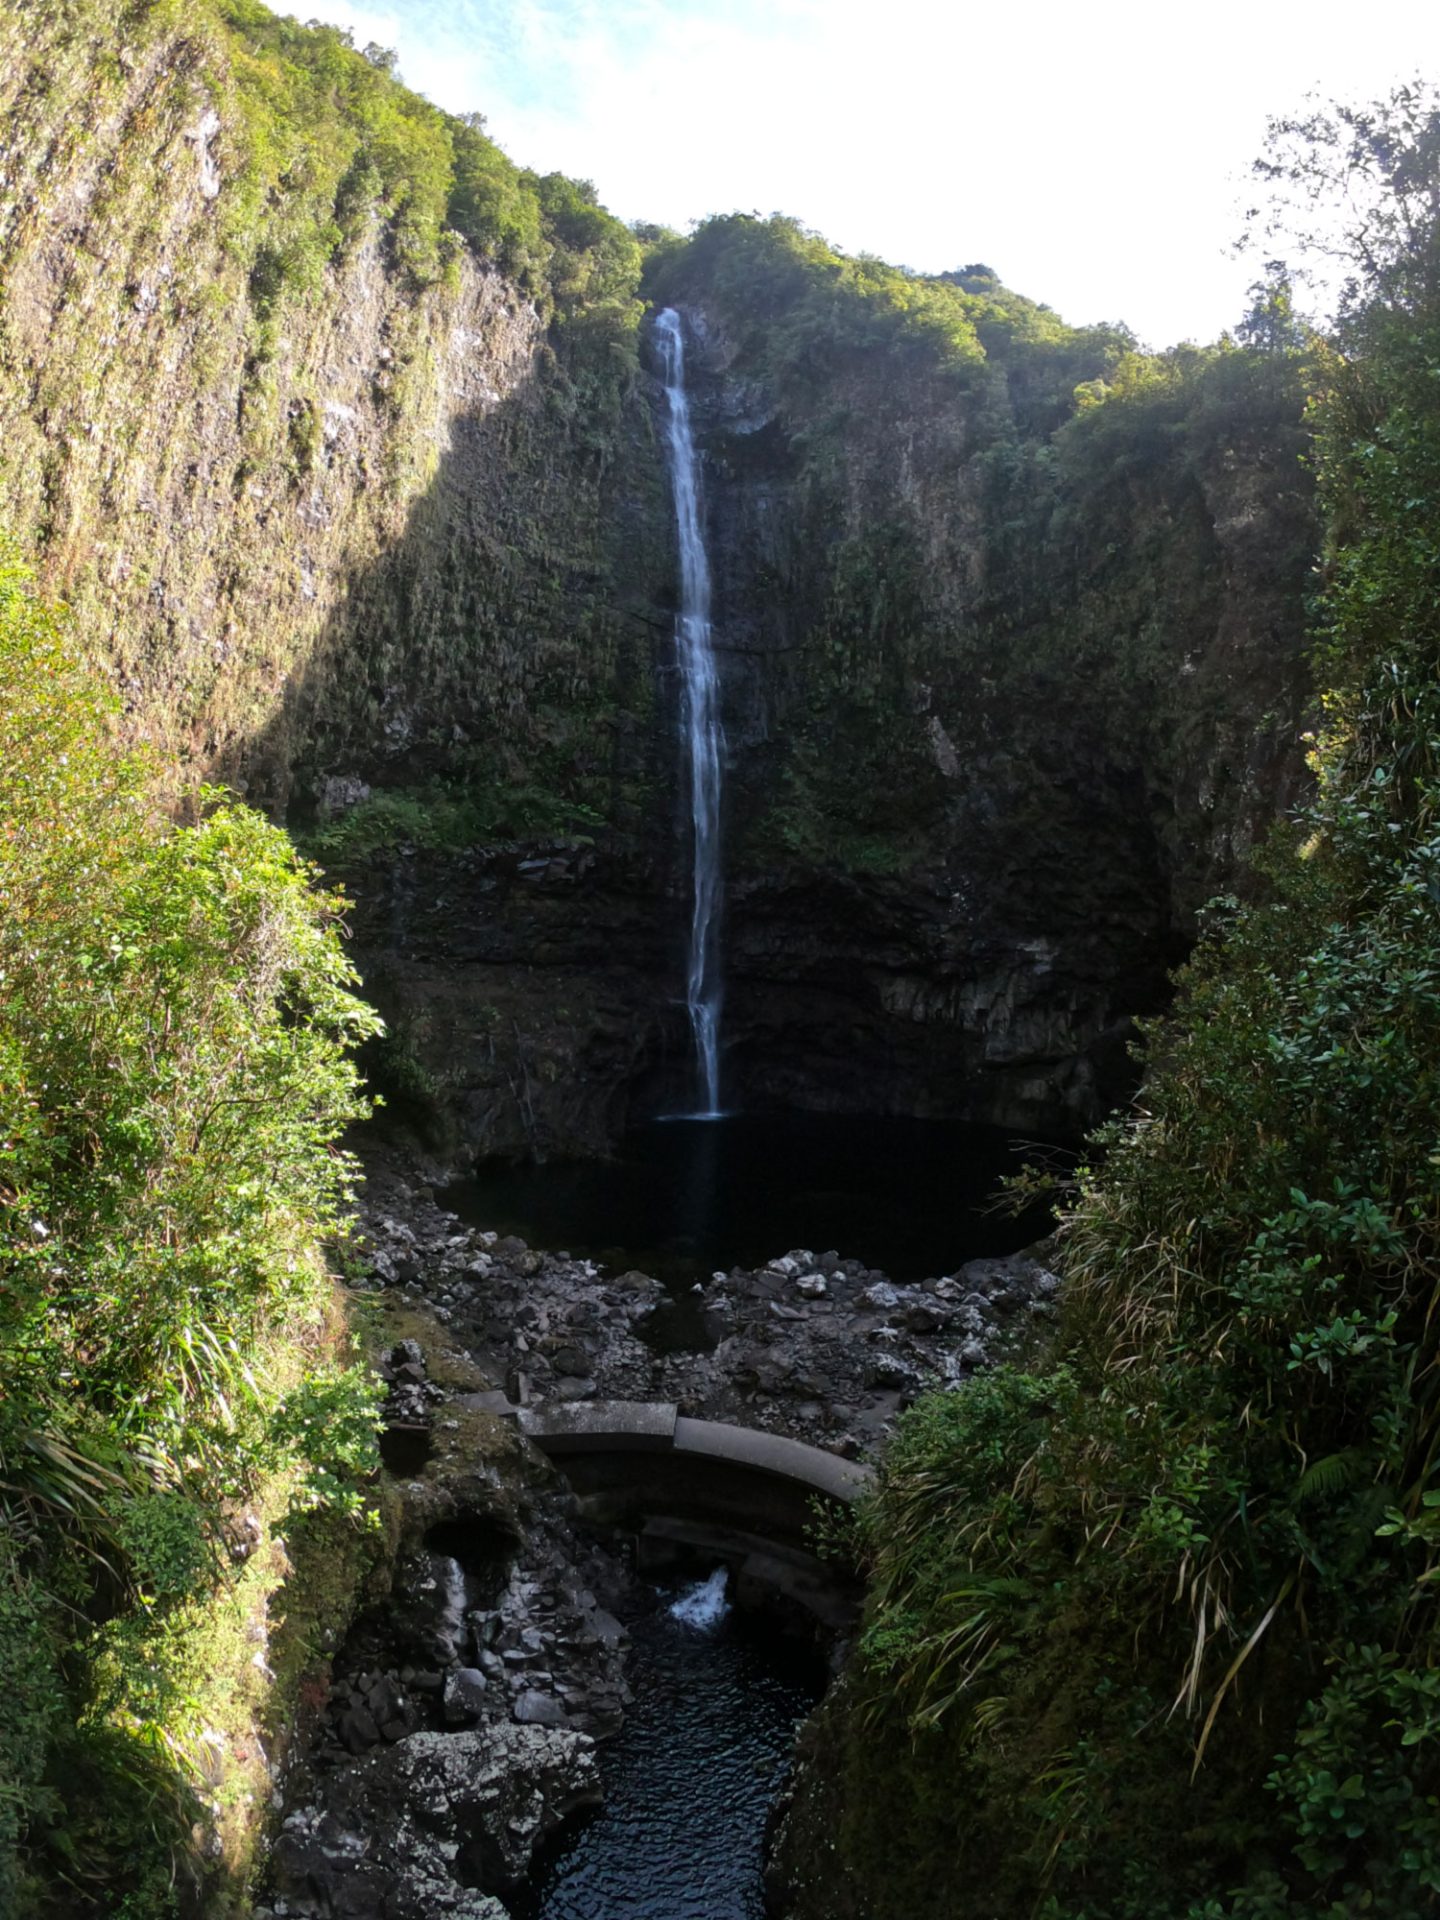 View of a waterfall from the hiking trail in the Takamaka Valley in Saint-Benoît